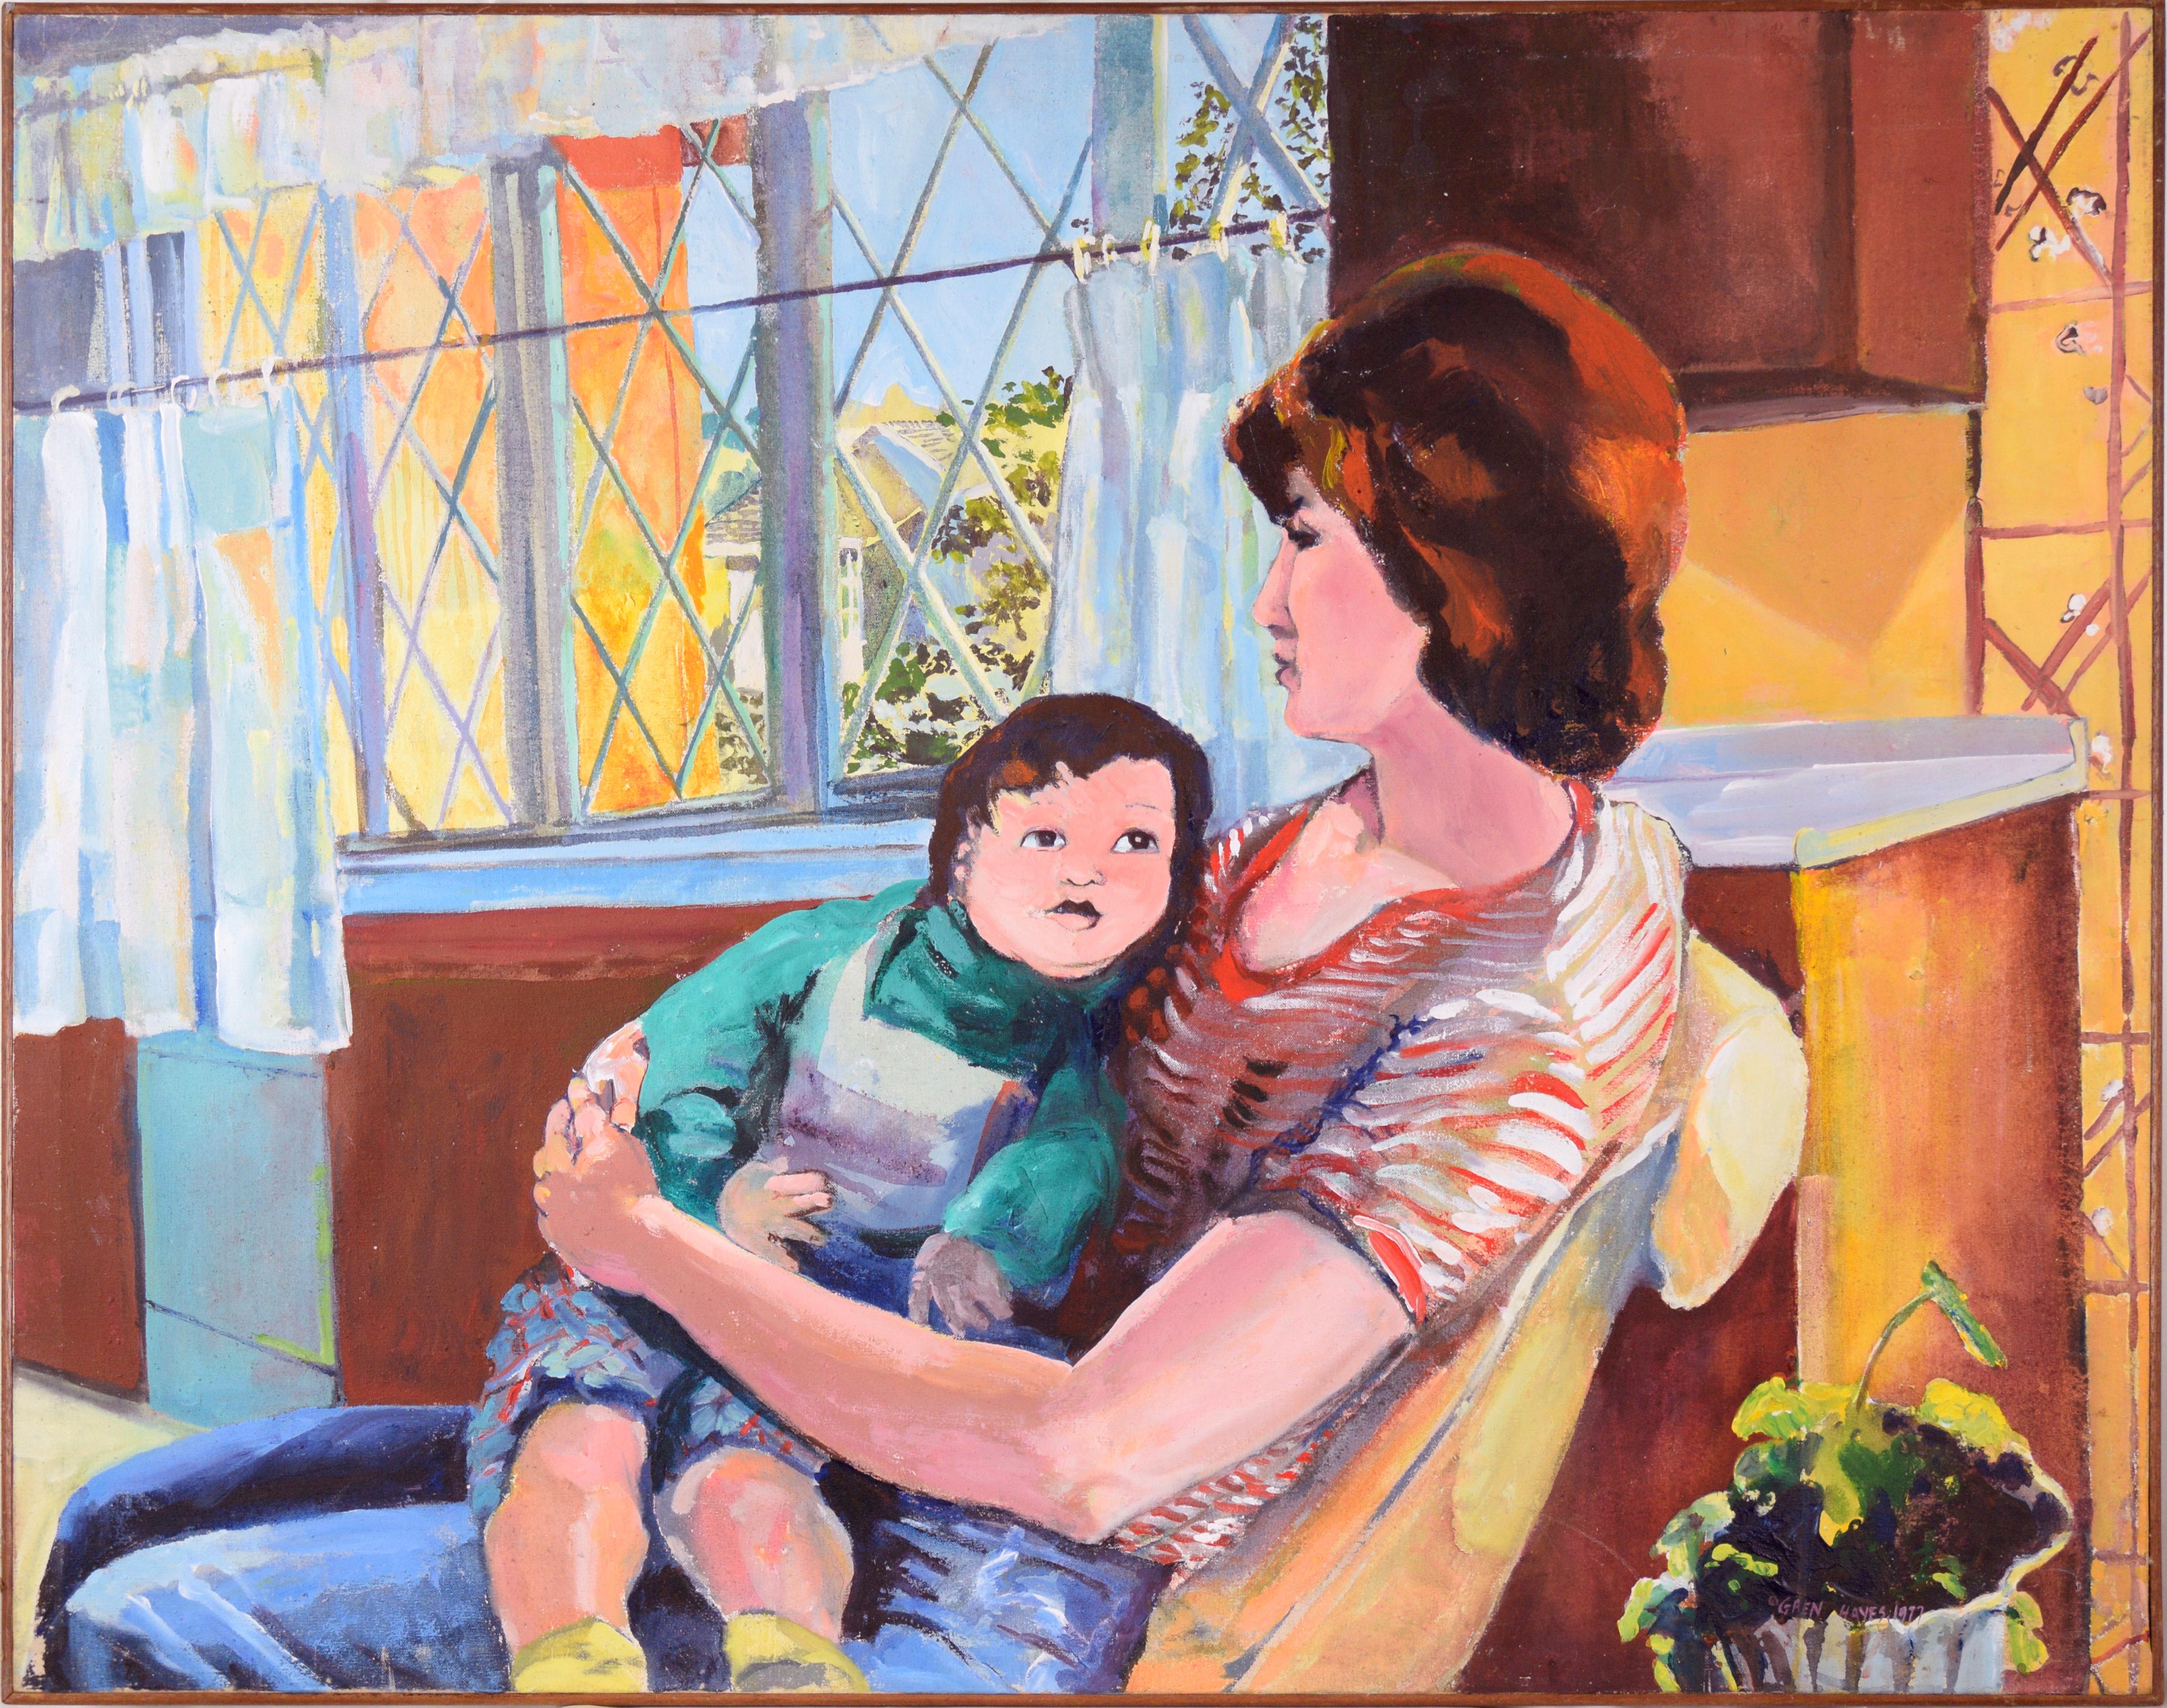 Patricia Gren Hayes Interior Painting - "Madam Suburbia #2" (Woman and Child, Sue & Casey) in Oil on Canvas